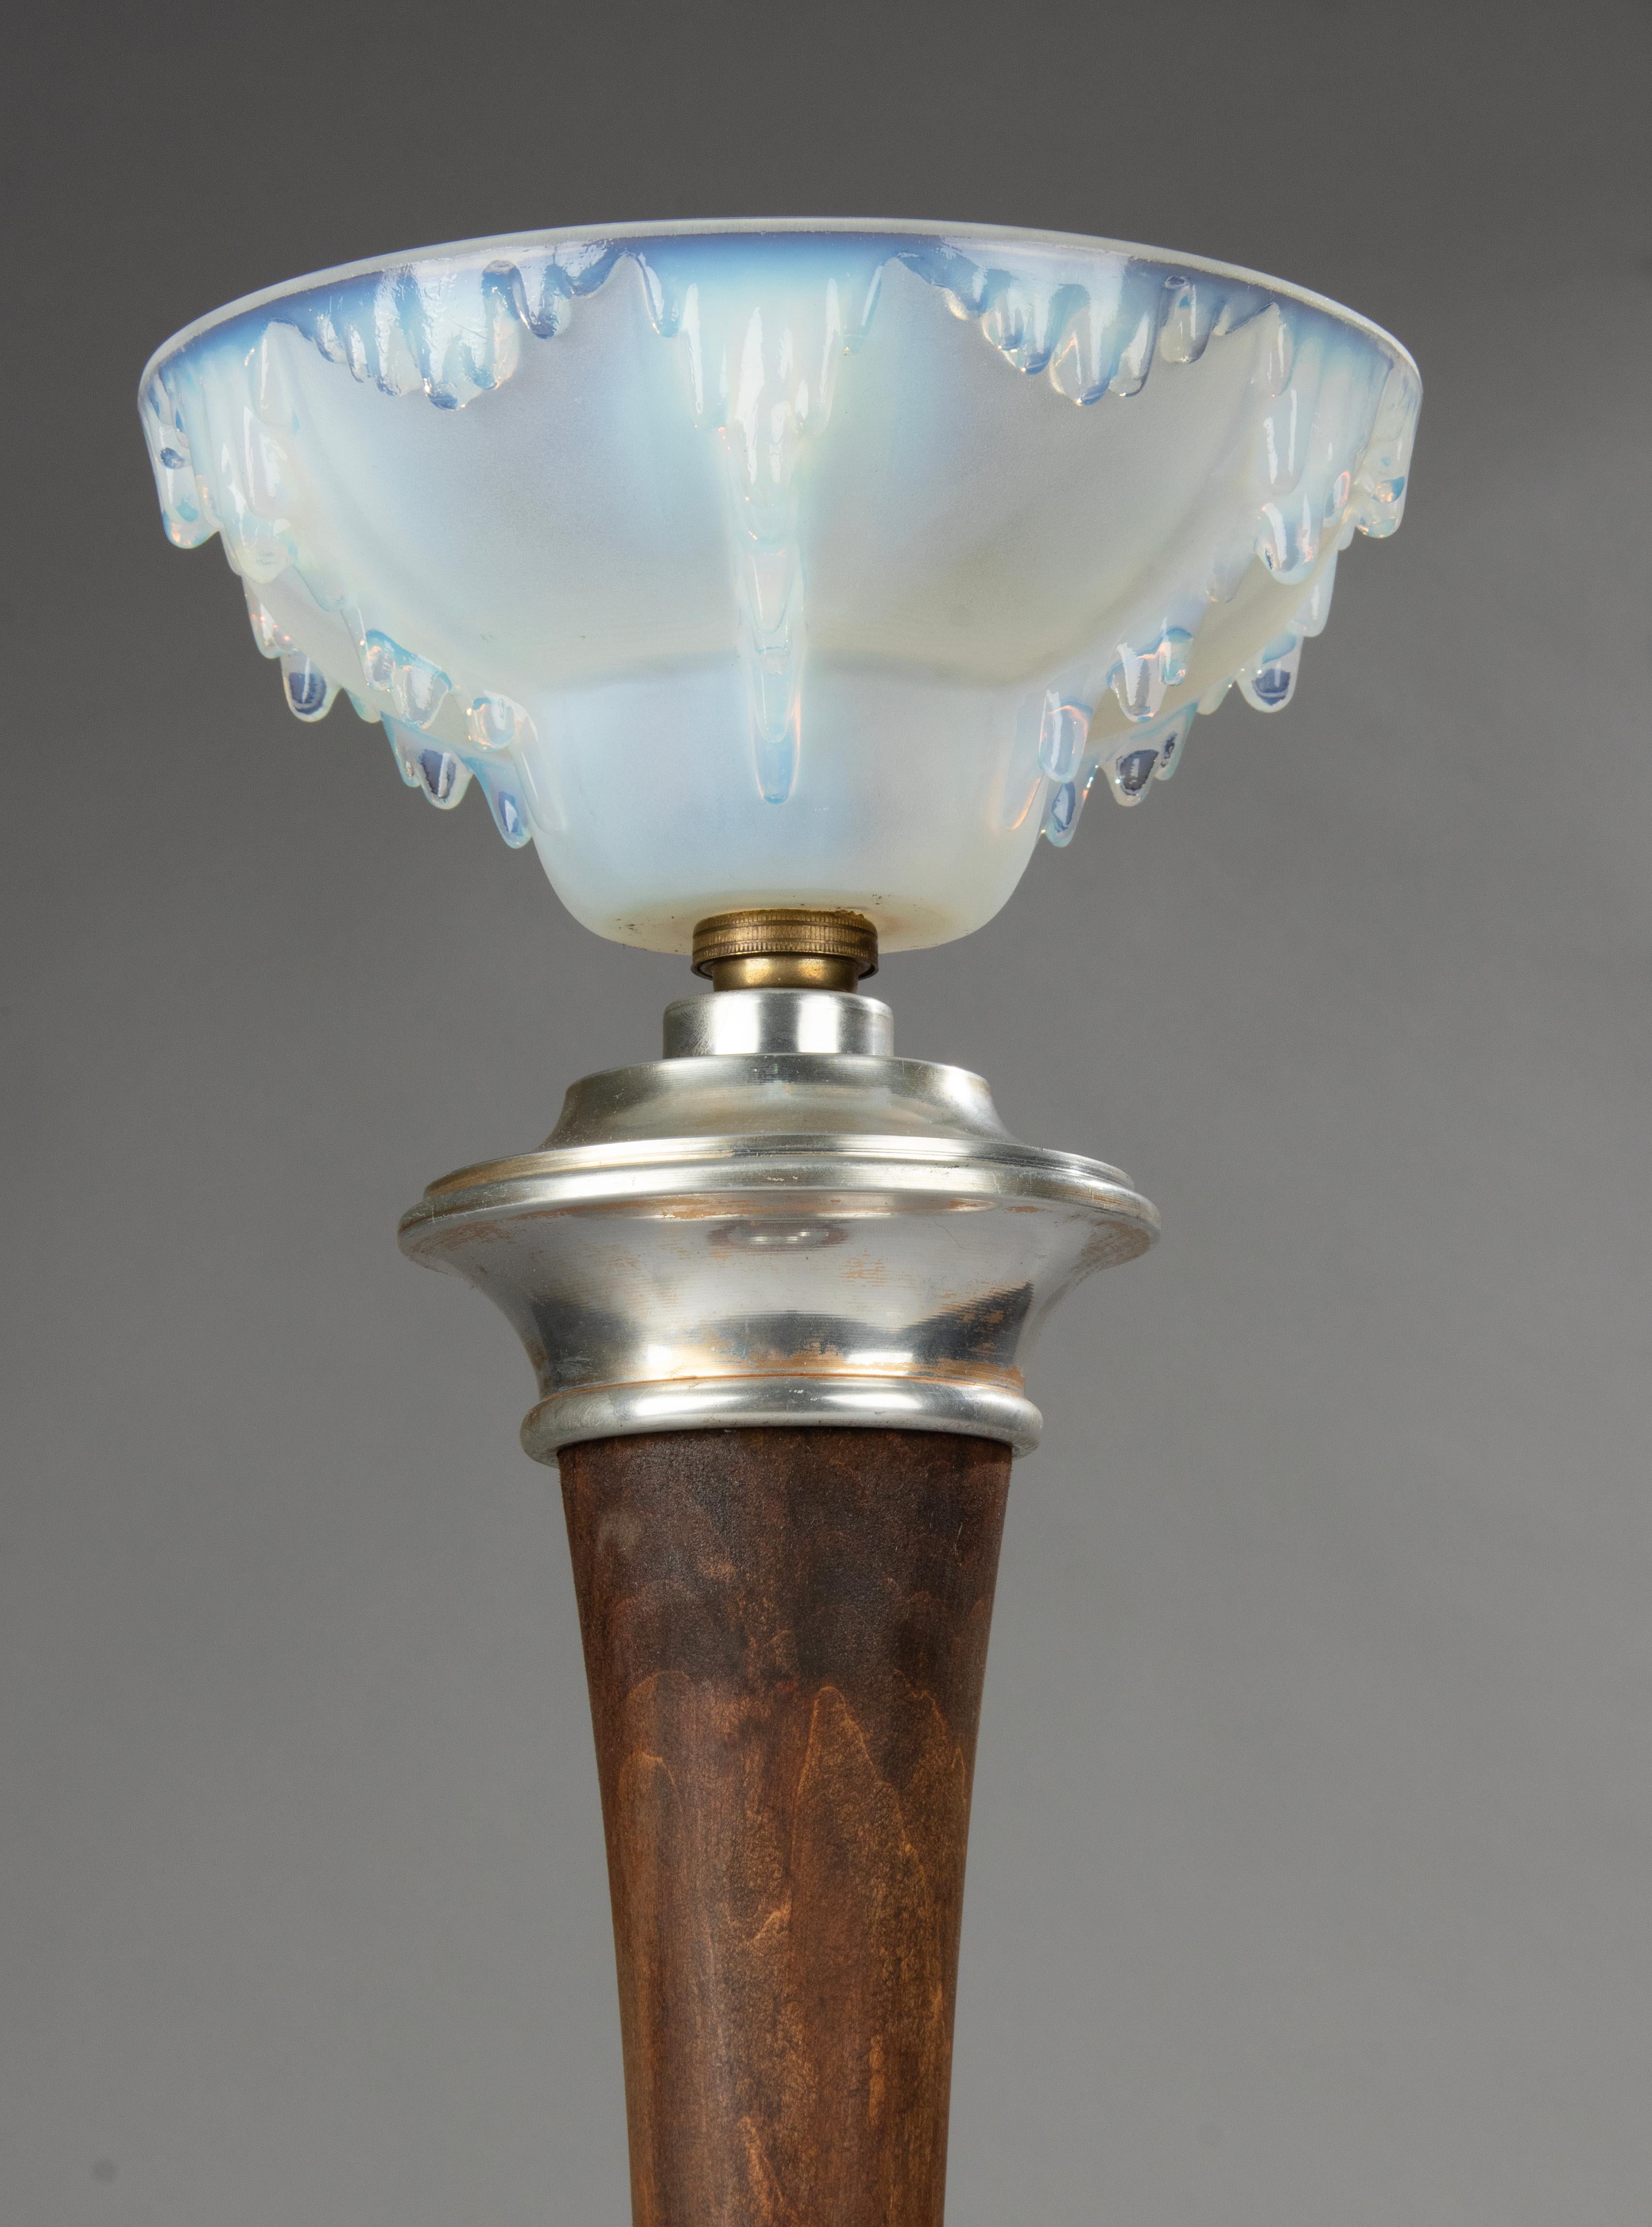 French Early 20th Century Art Deco Table Lamp, Ezan Style Blue Glass Shade For Sale